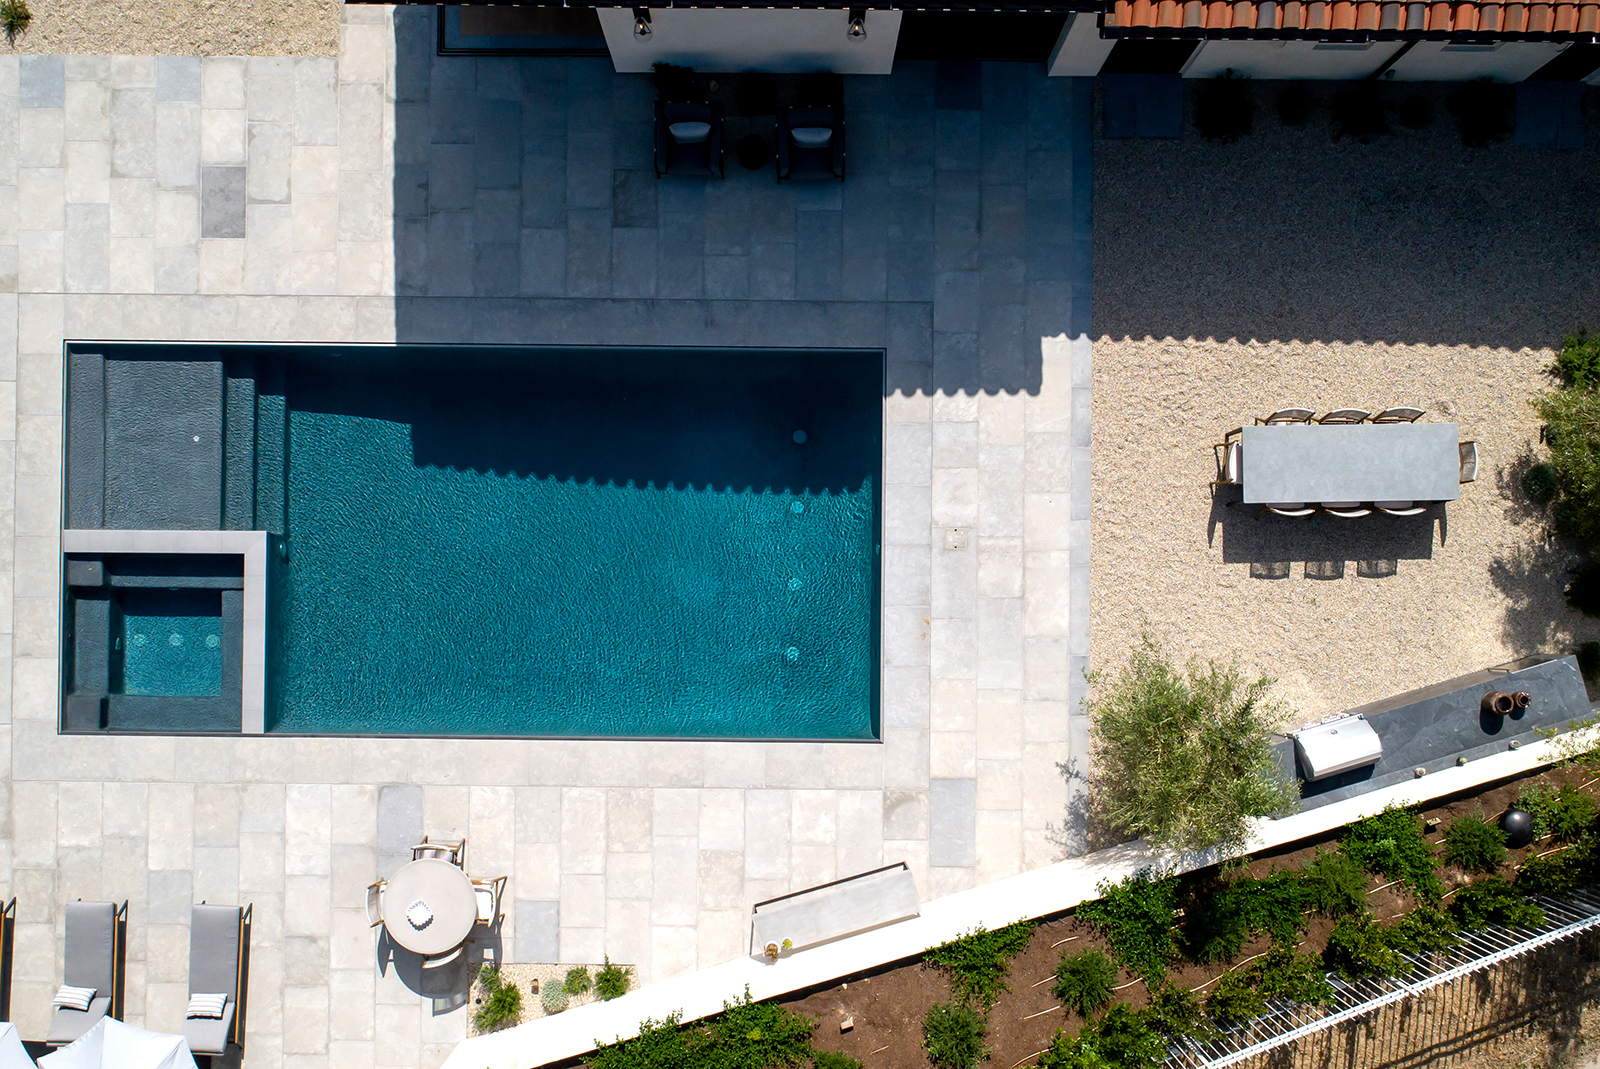 An aerial view of a property with a swimming pool